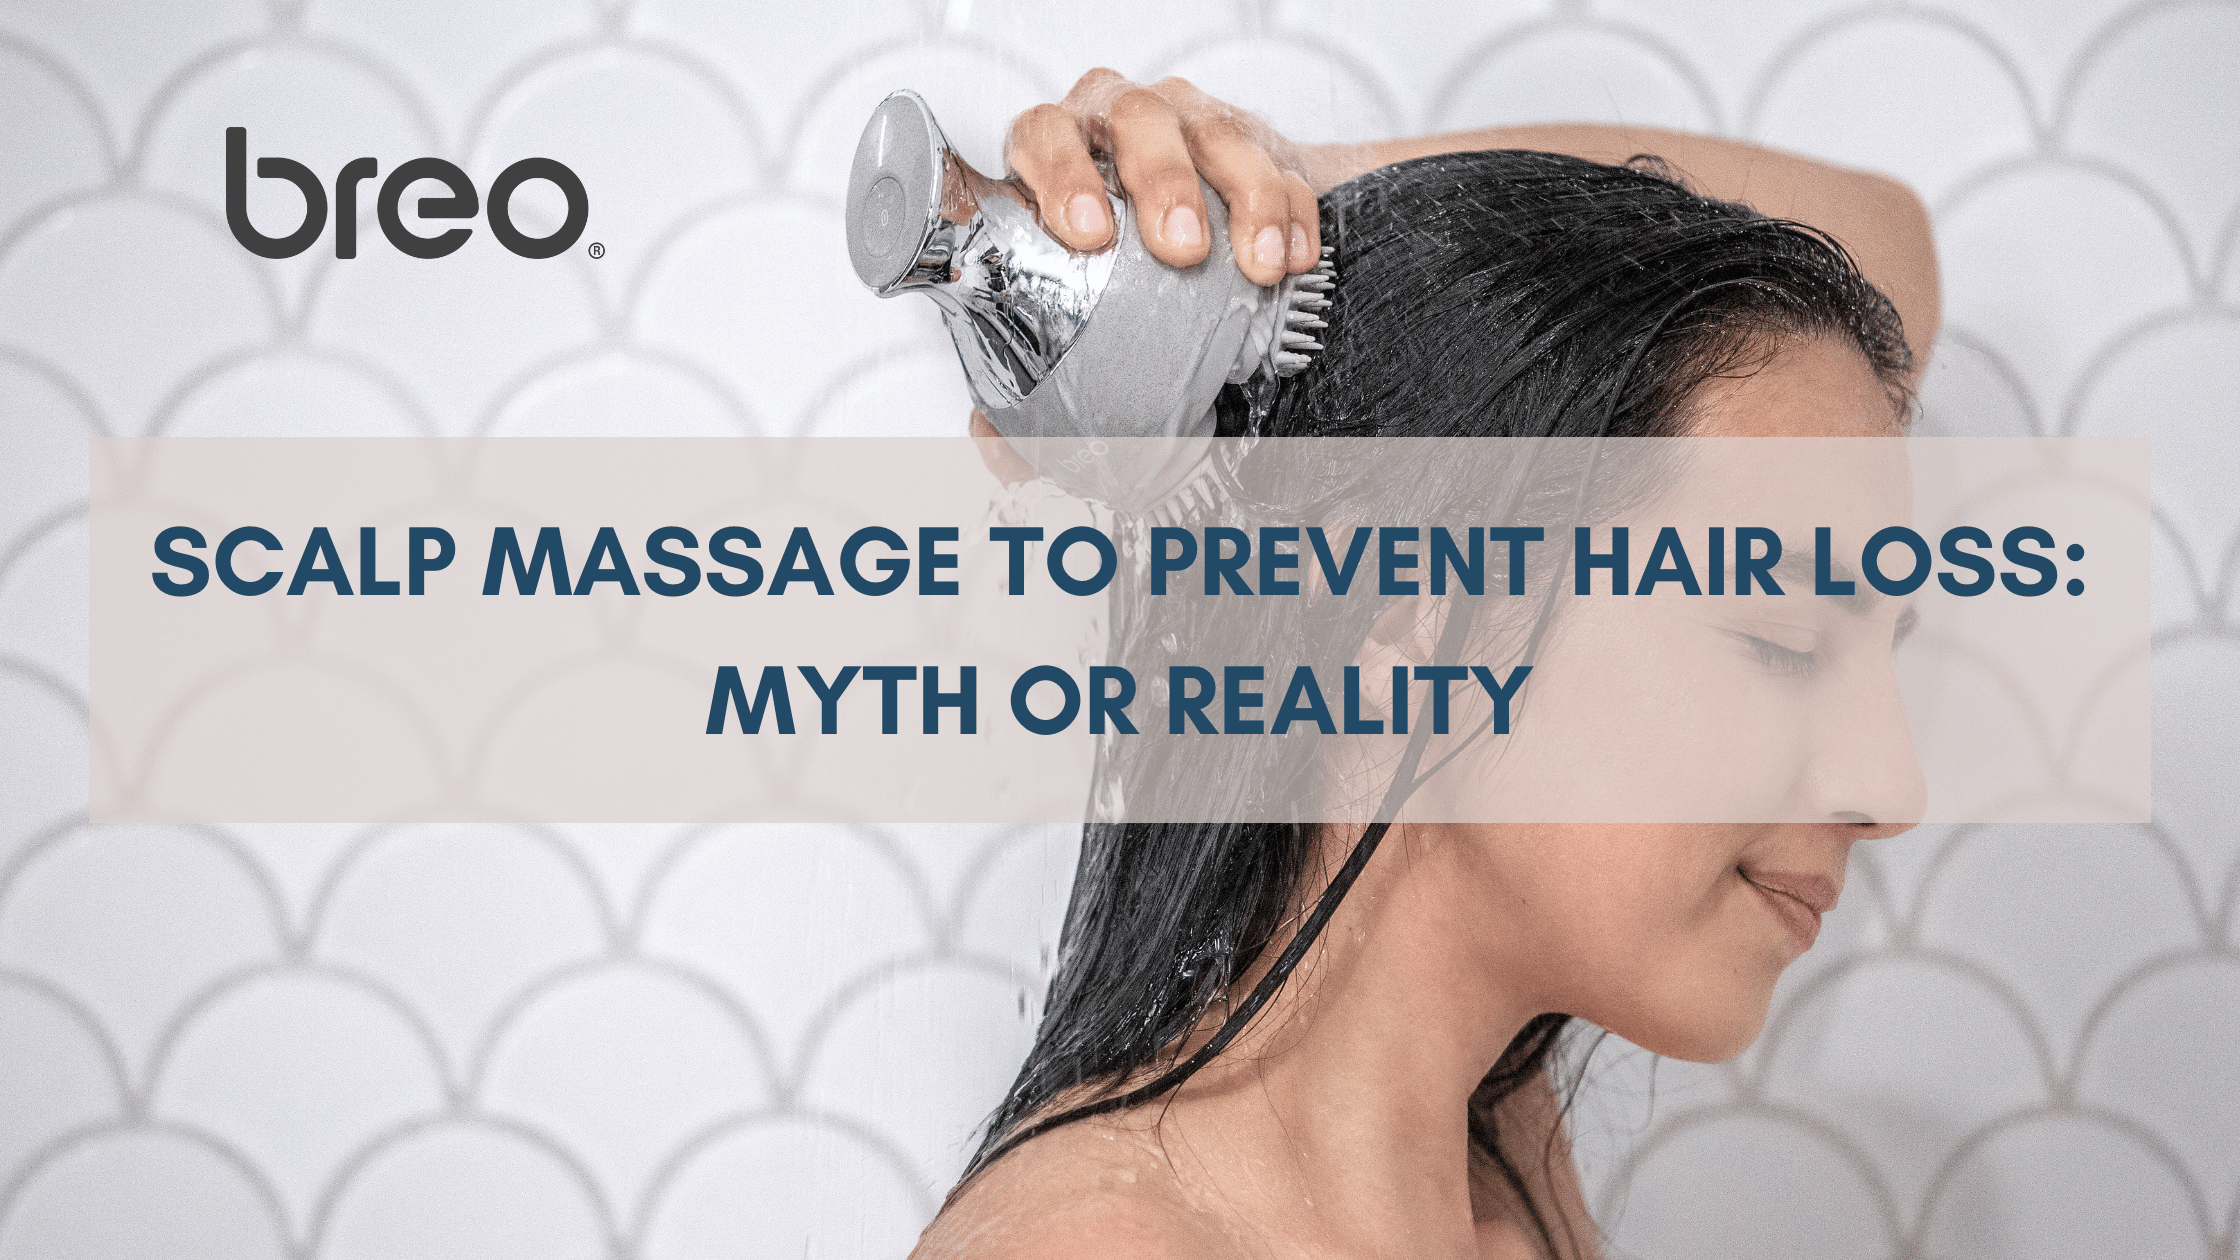 Scalp massage to prevent hair loss: Myth or reality